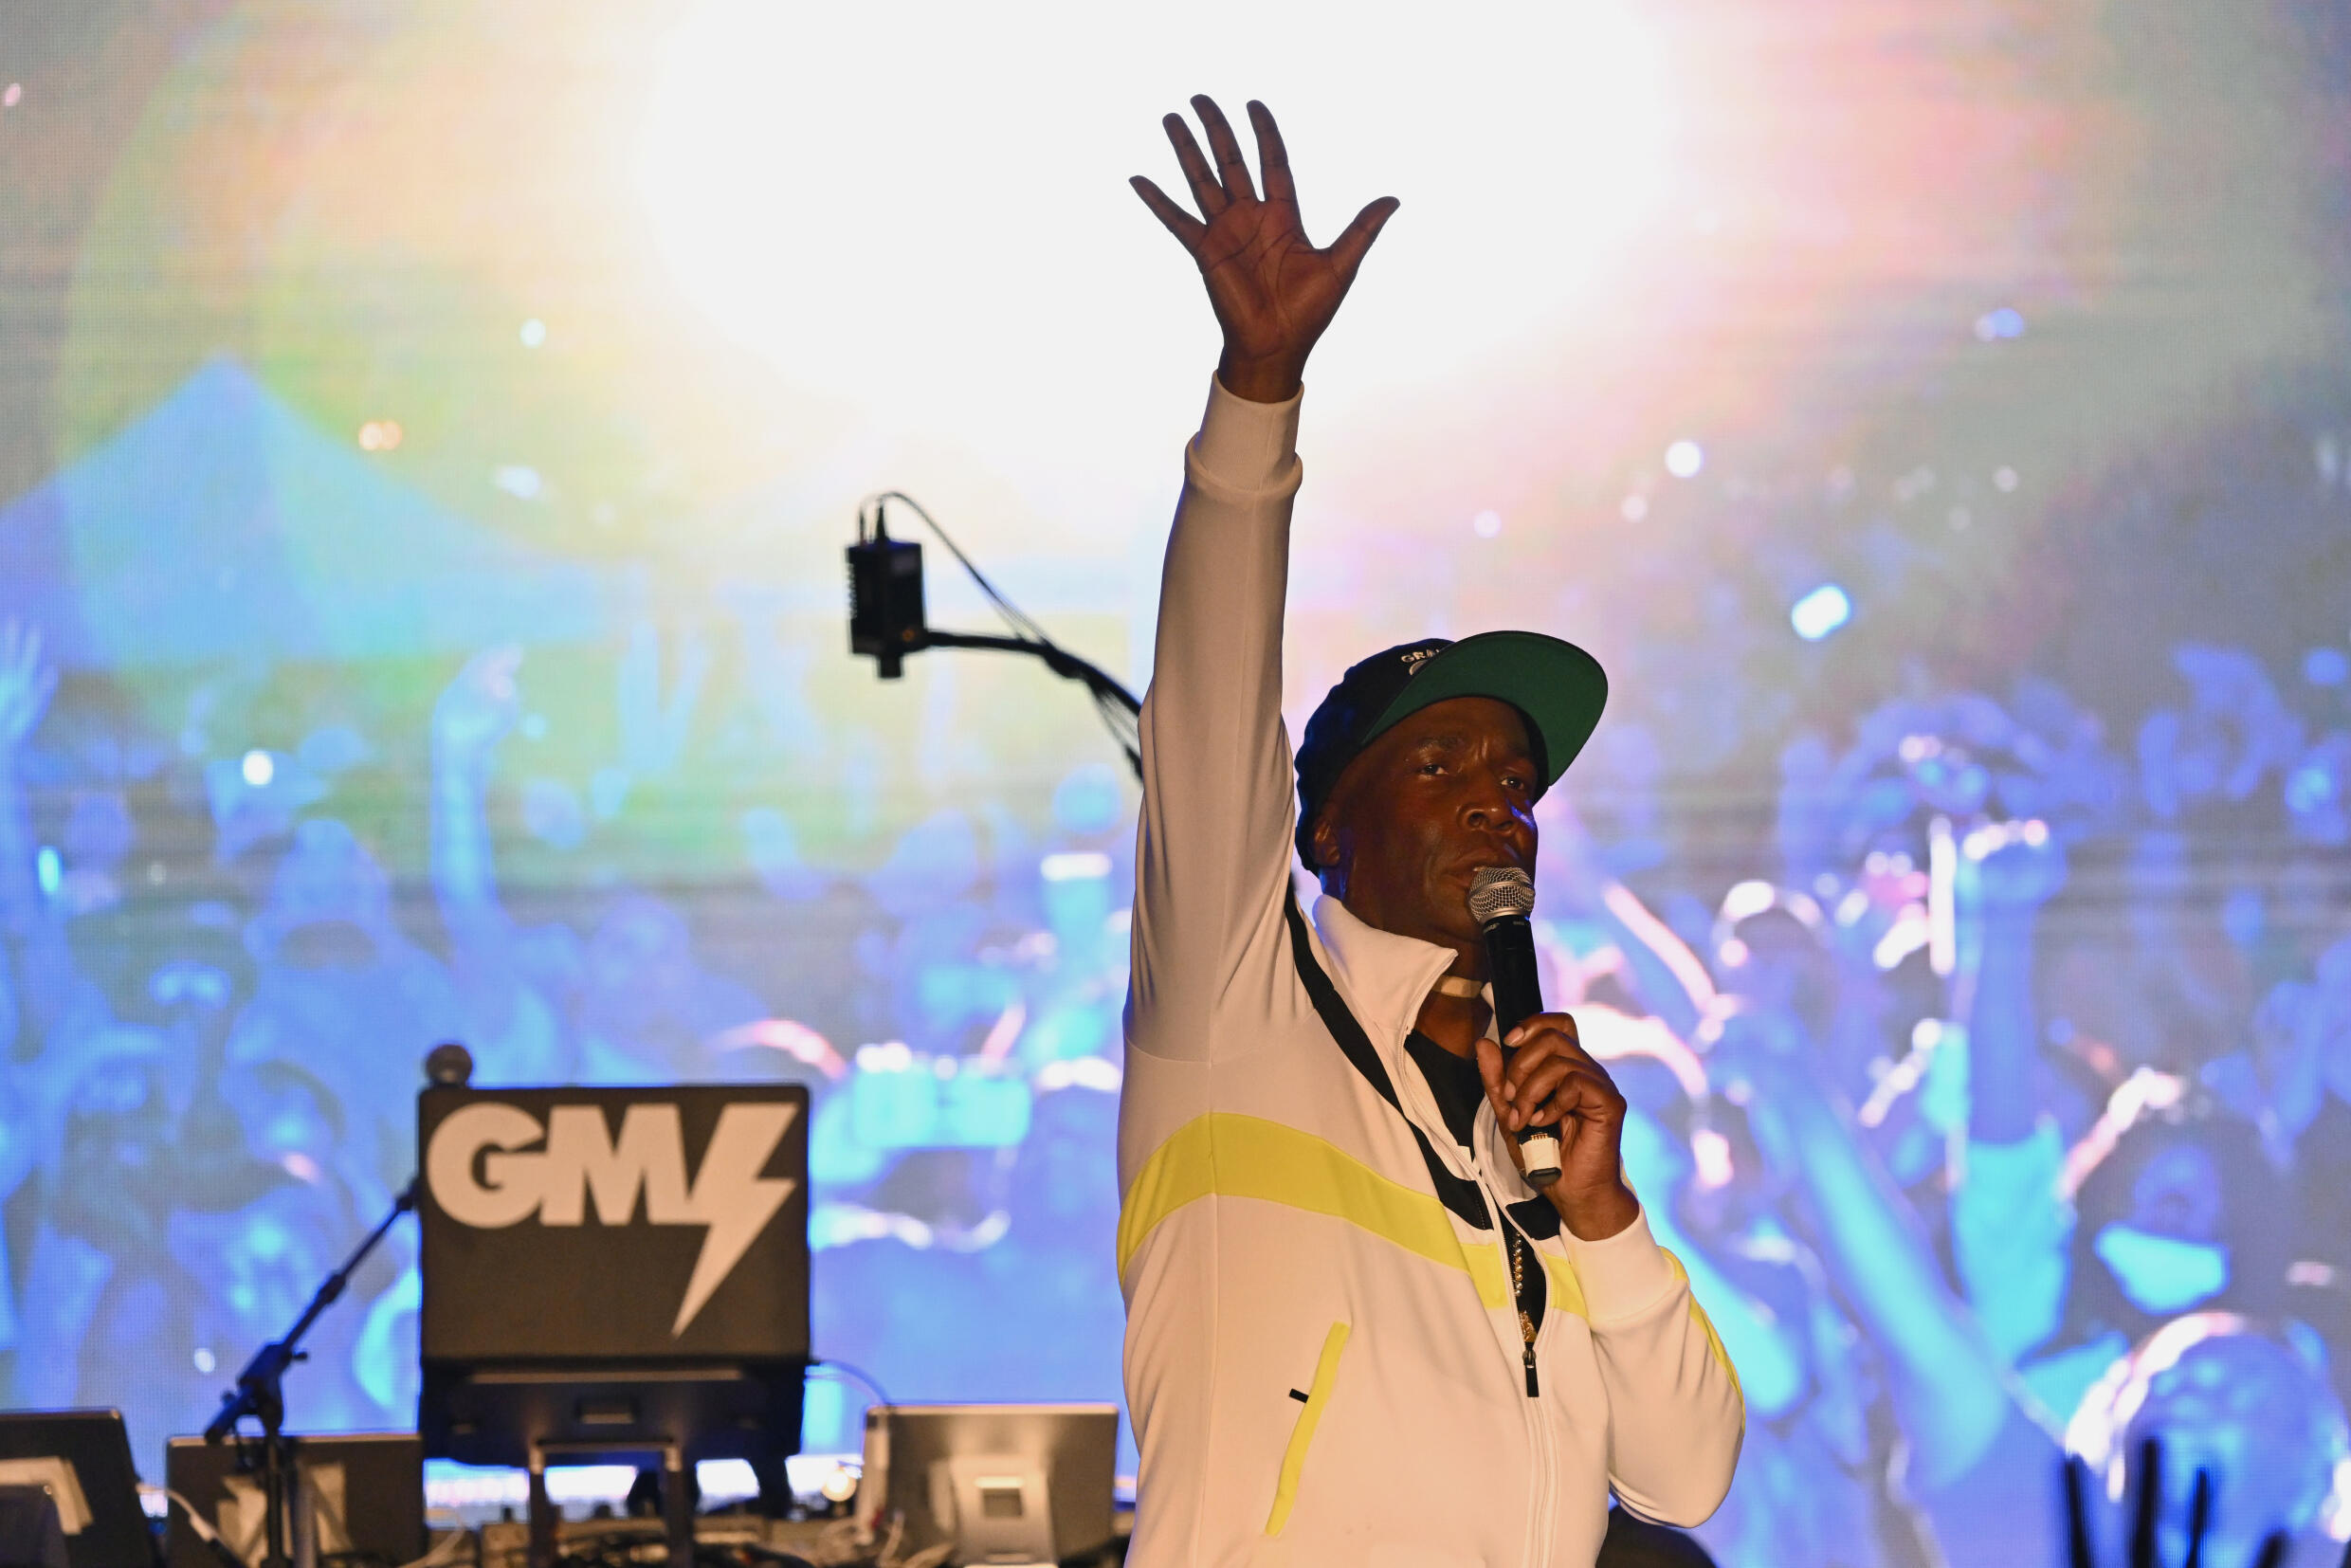 As a teenager Grandmaster Flash began pioneering the turntable as a music instrument, playing the now iconic Bronx block parties that gave birth to hip-hop and revolutionized music